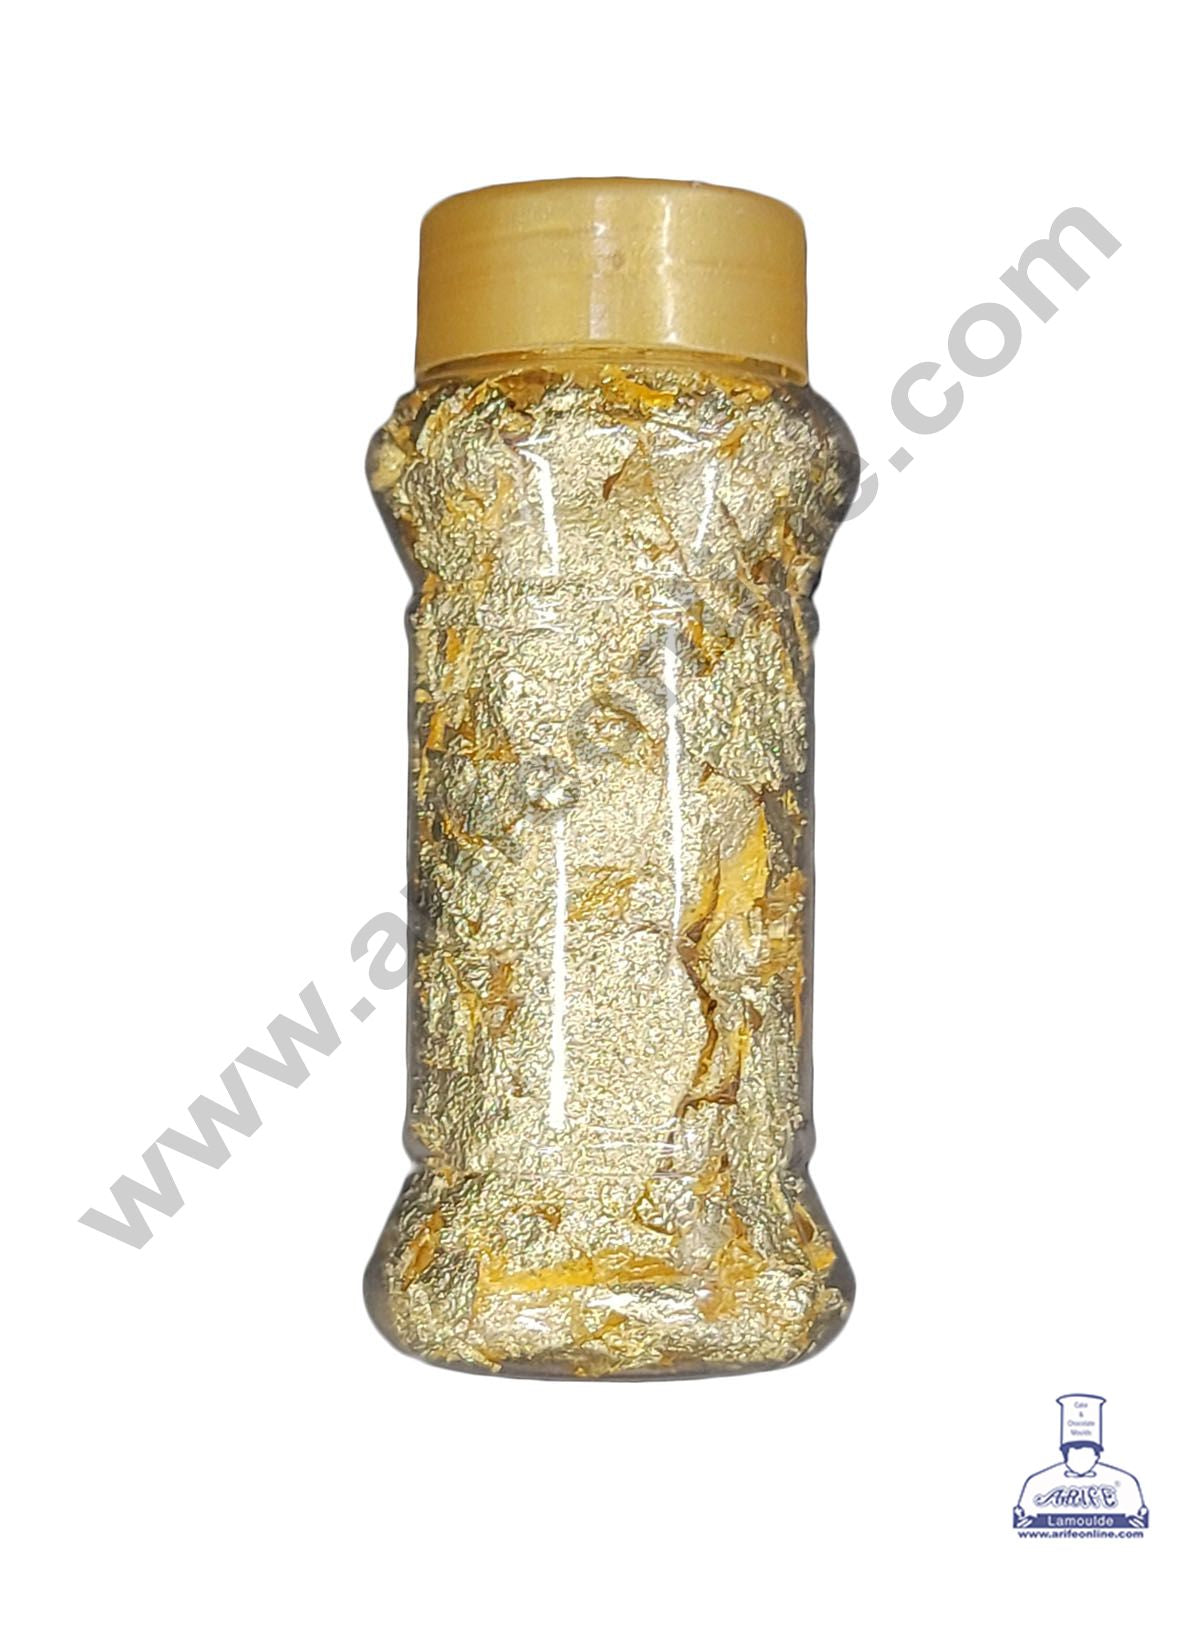 Edible Gold Leaf Flakes [P14578] - $9.95. : , Cakestuff  - your one stop cake and cupcake decorating supplies shop!